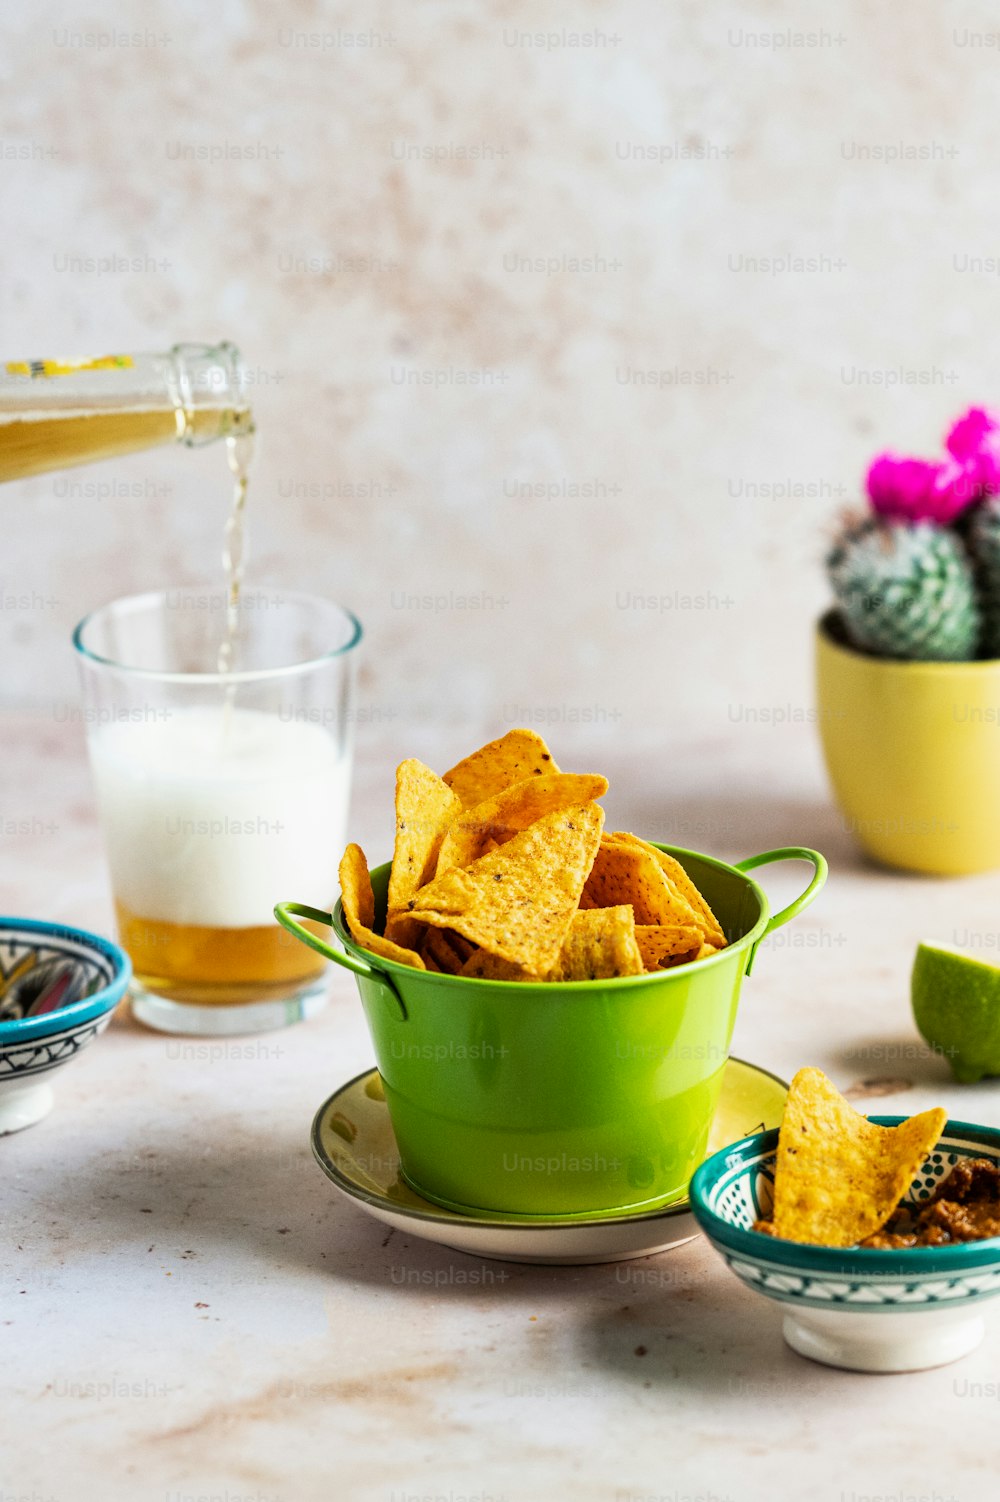 a green bowl filled with tortilla chips next to a glass of milk